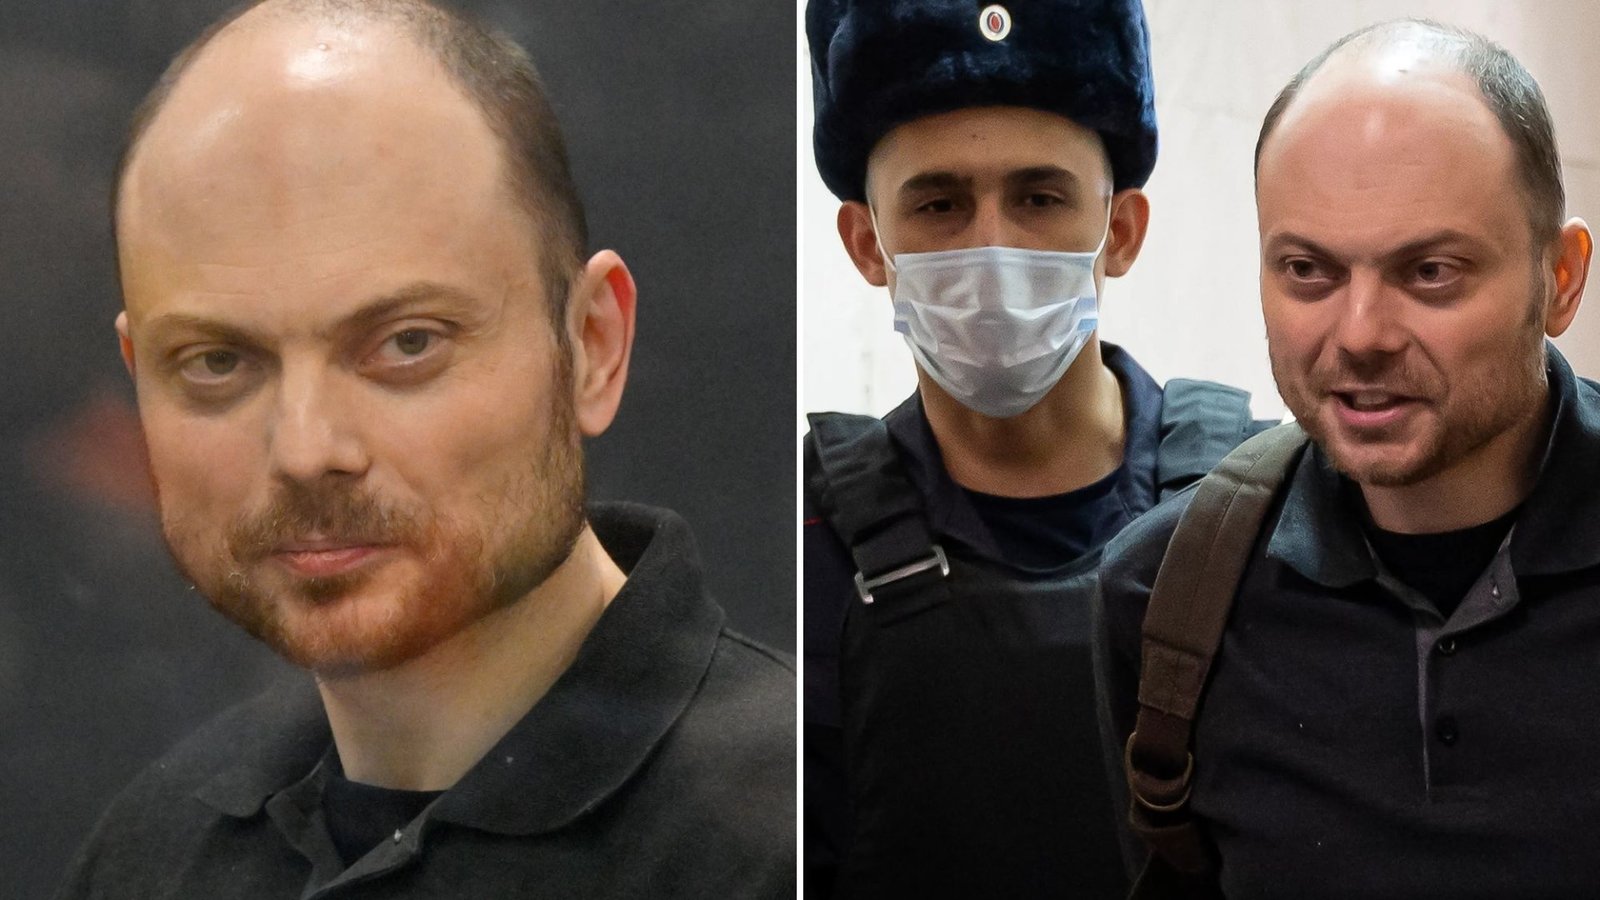 Putin’s Brit enemy Vladimir Kara-Murza is moved to Russian ‘punishment block’ prison ‘for not standing up quick enough’